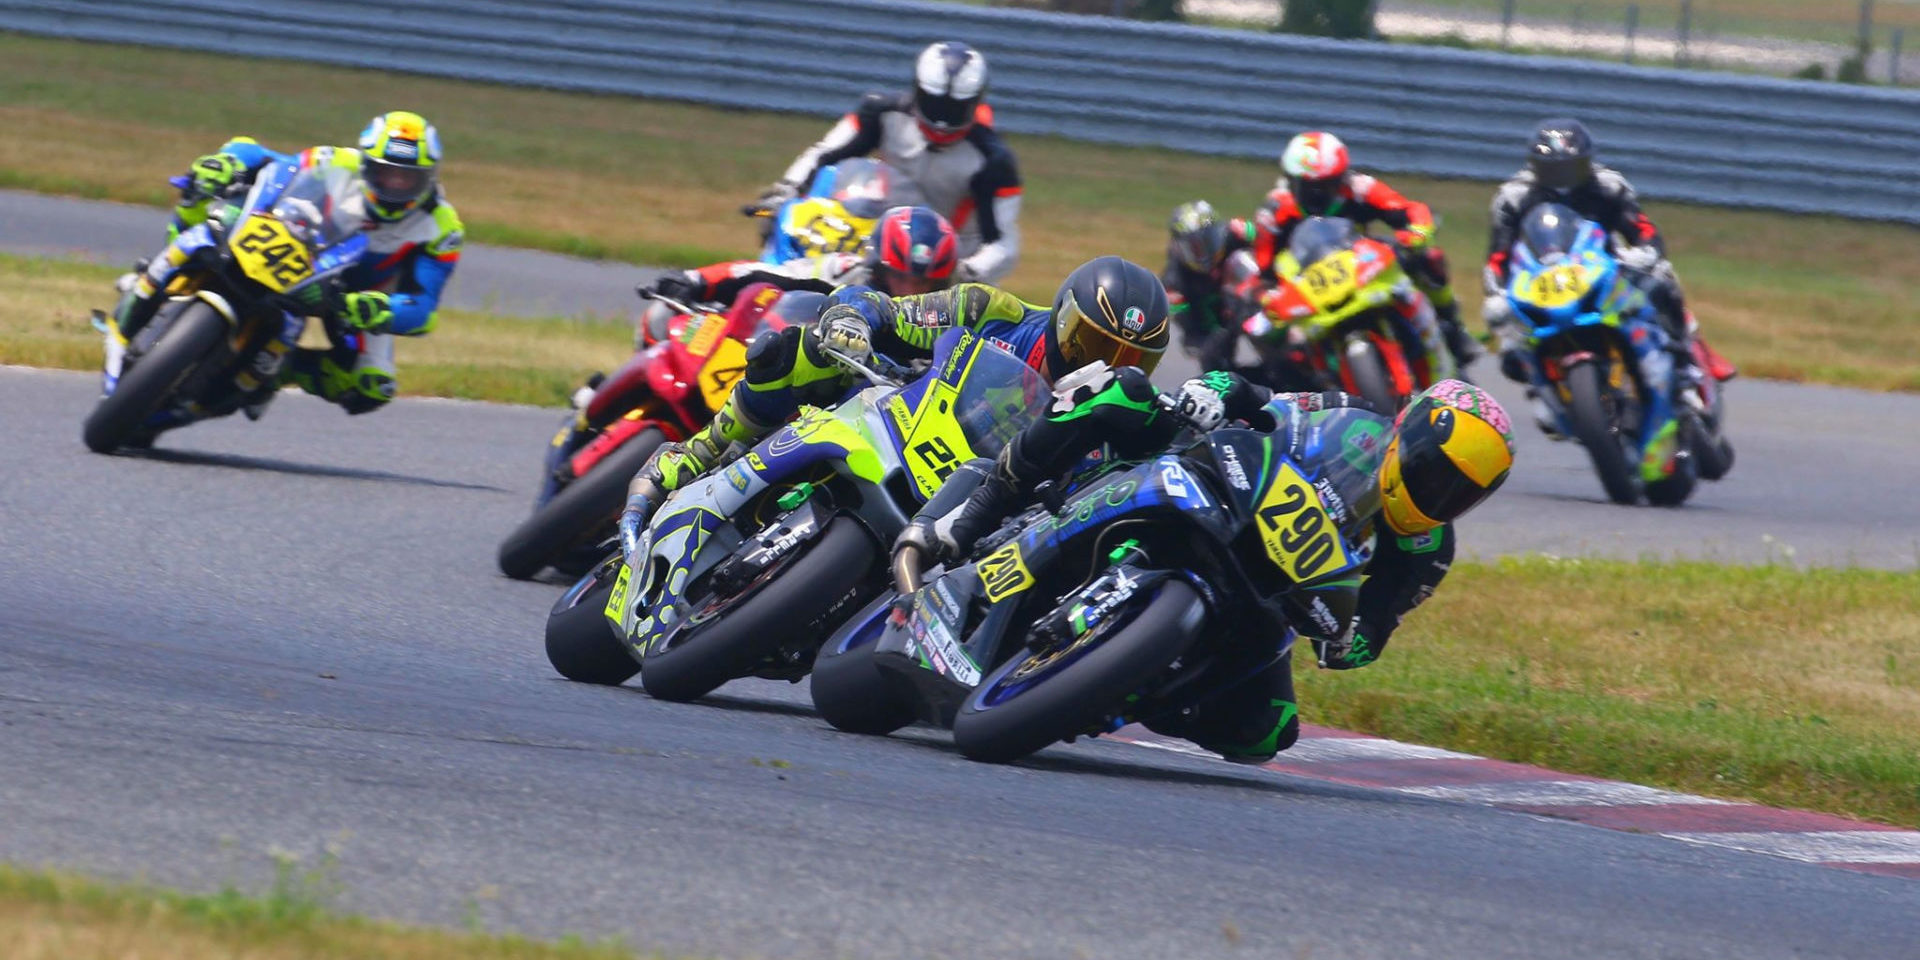 Justine Miraglia (290) leading the MotoGirlGT Superbike race and making her way through the Heavyweight Supersport Amateur field at New Jersey Motorsports Park. Photo by etechphoto.com, courtesy MotoGirlGT.